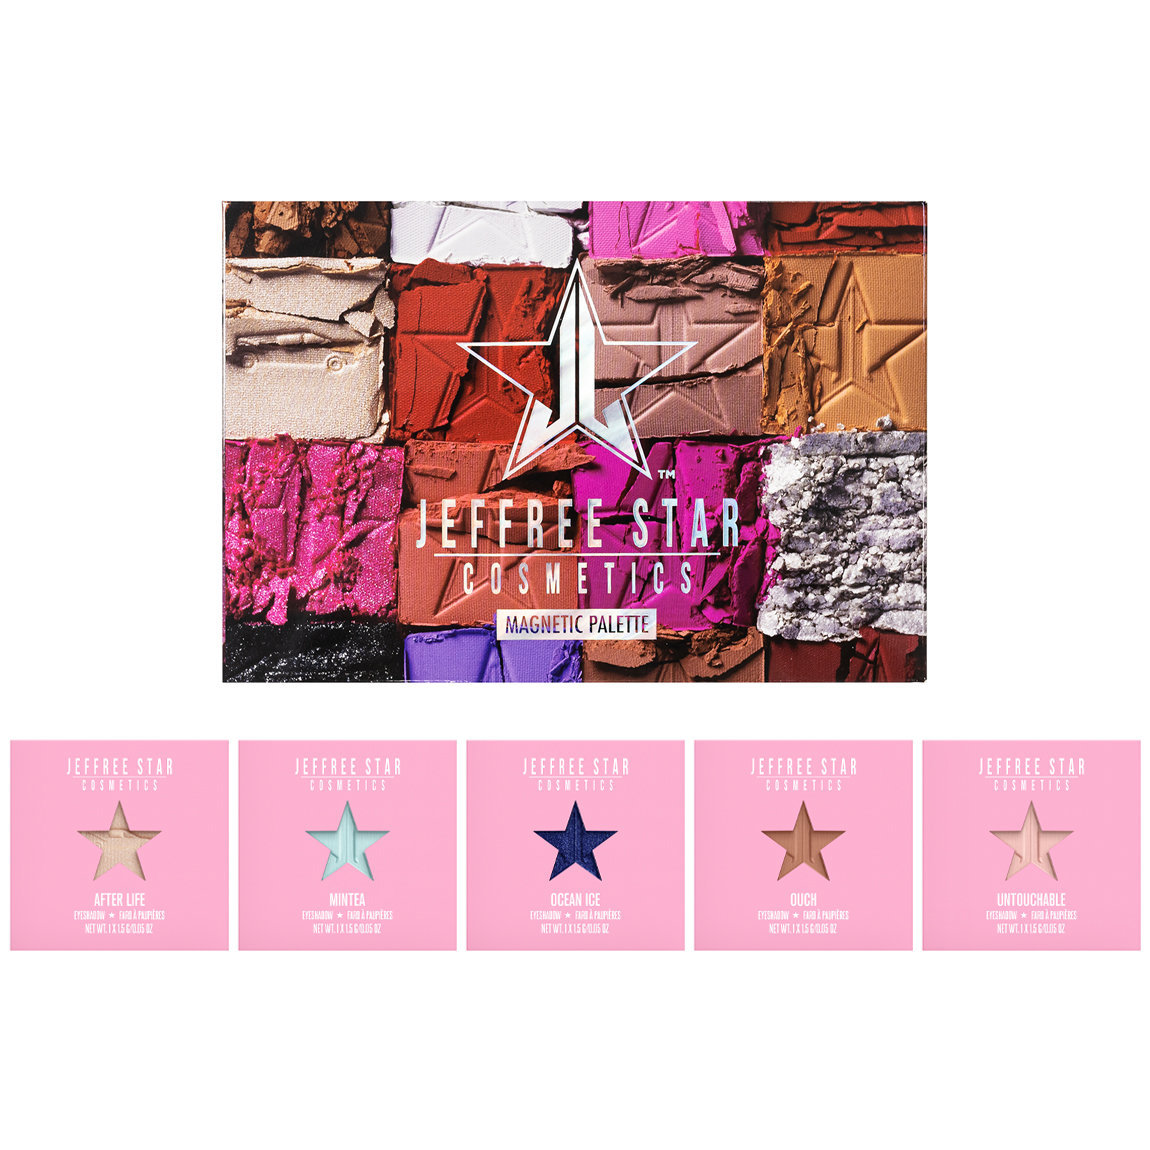 Jeffree Star Cosmetics Artistry 24-Pan Delicious Bundle alternative view 1 - product swatch.